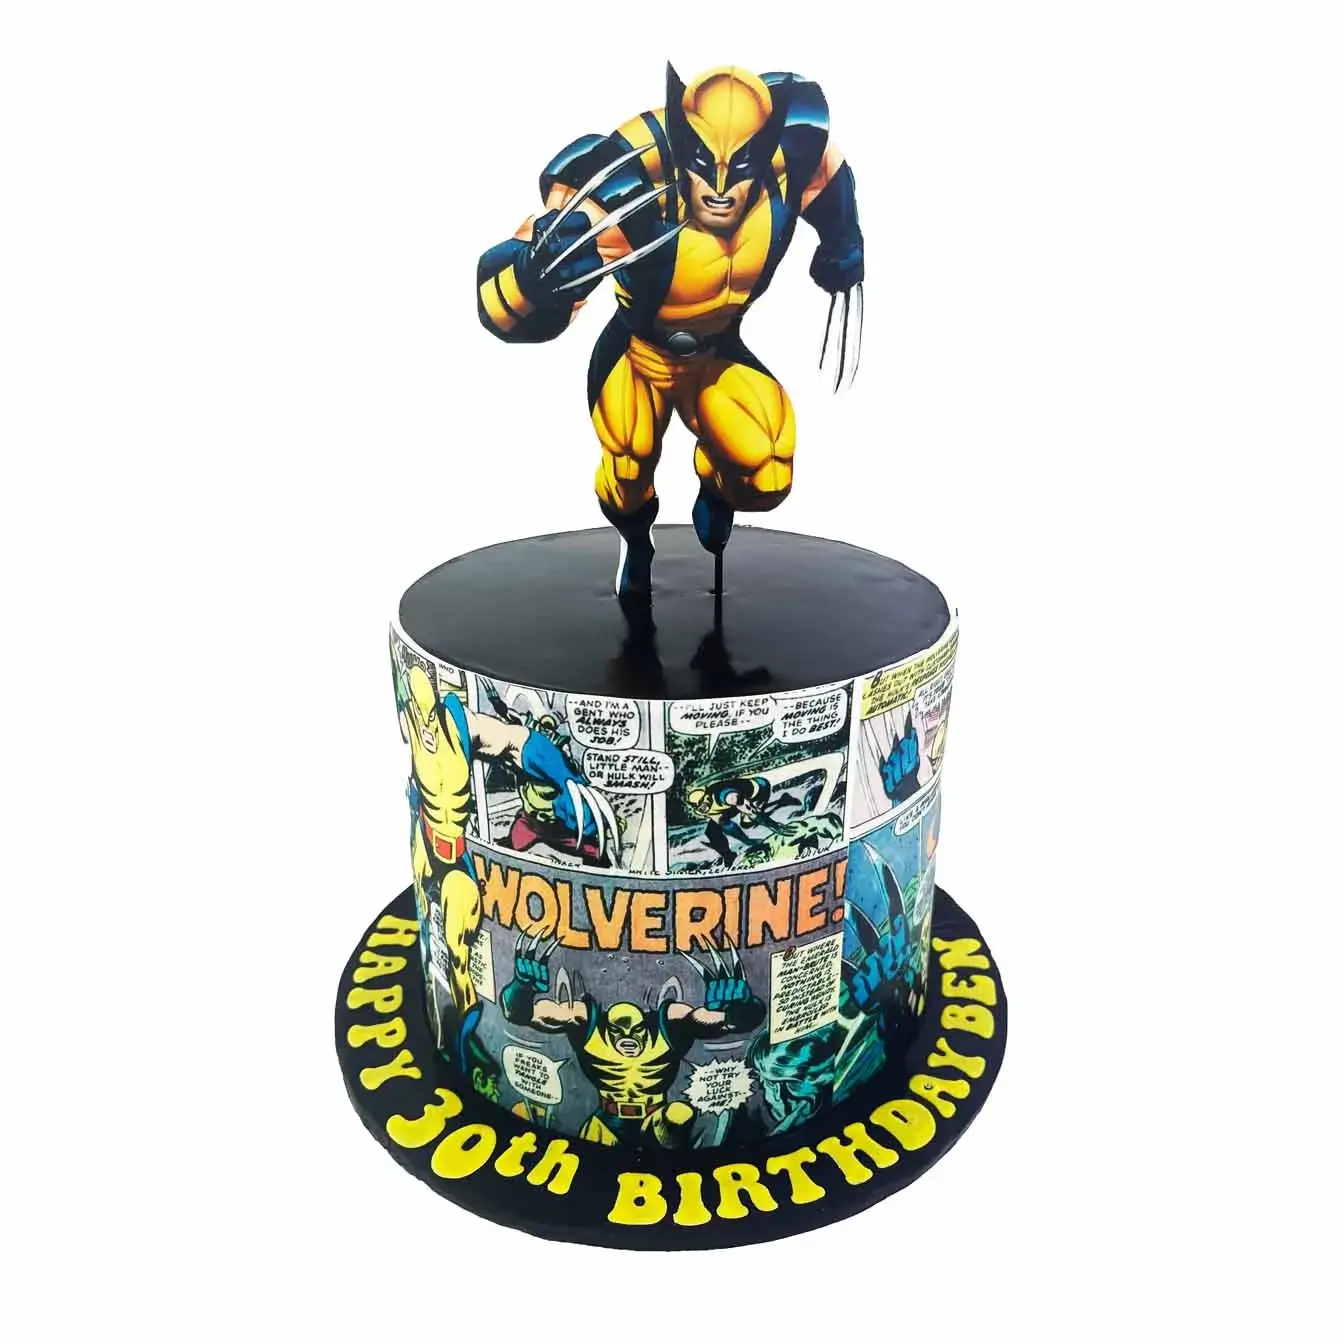  A close-up photo of a Wolverine cake inspired by the Marvel comic book character, featuring his signature claws, fierce expression, and muscular physique. The cake is hand-decorated with fondant and edible paint in a unique comic book-style design.